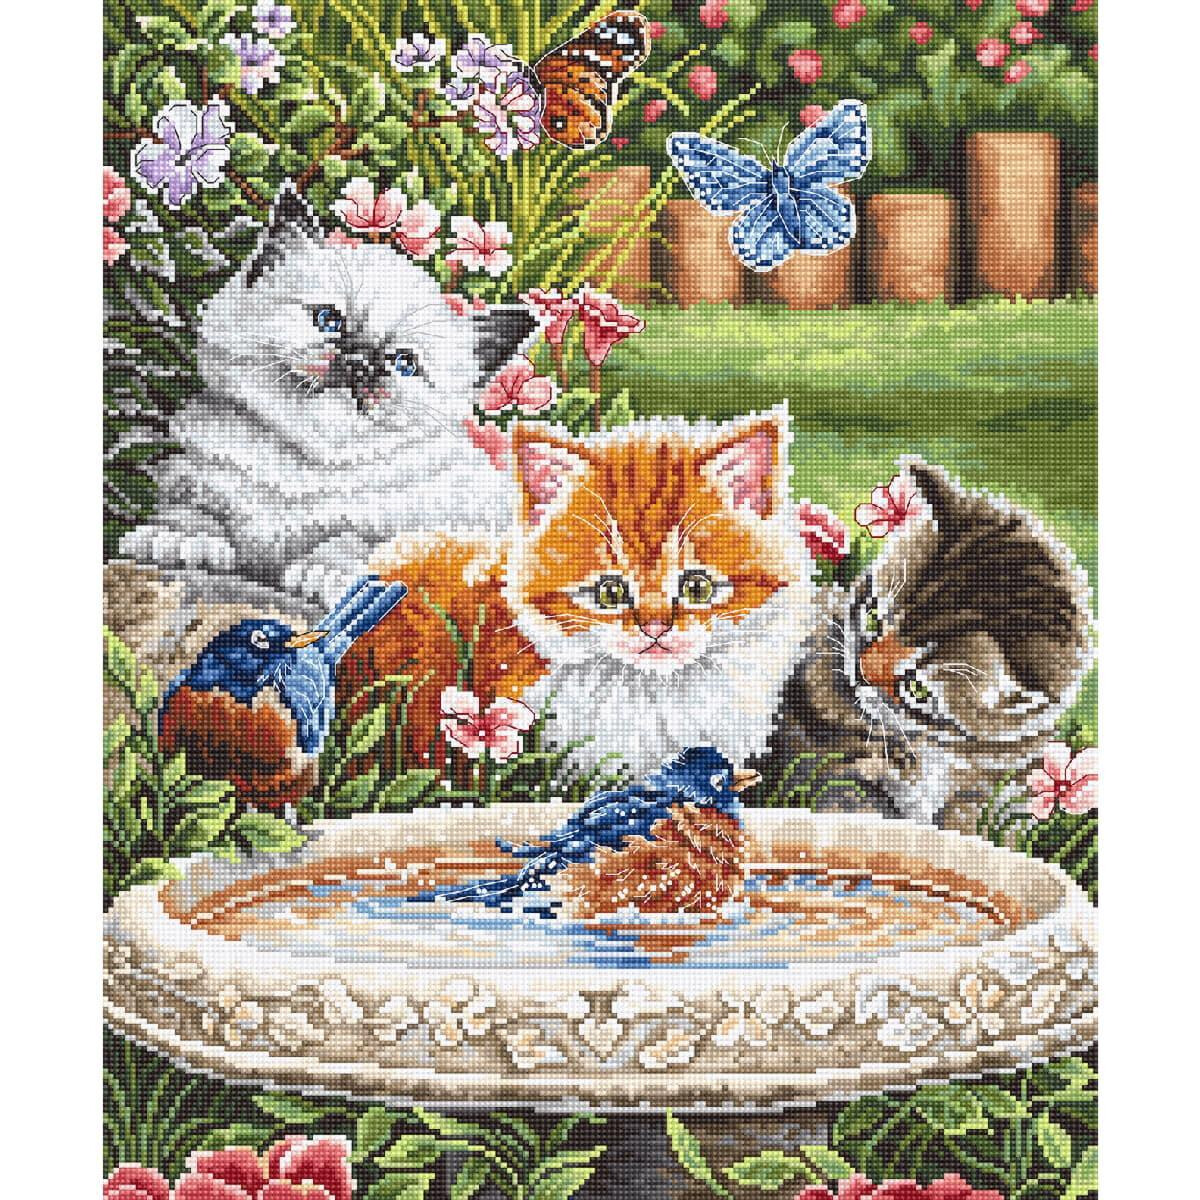 A vibrant image of three kittens in a lush garden...